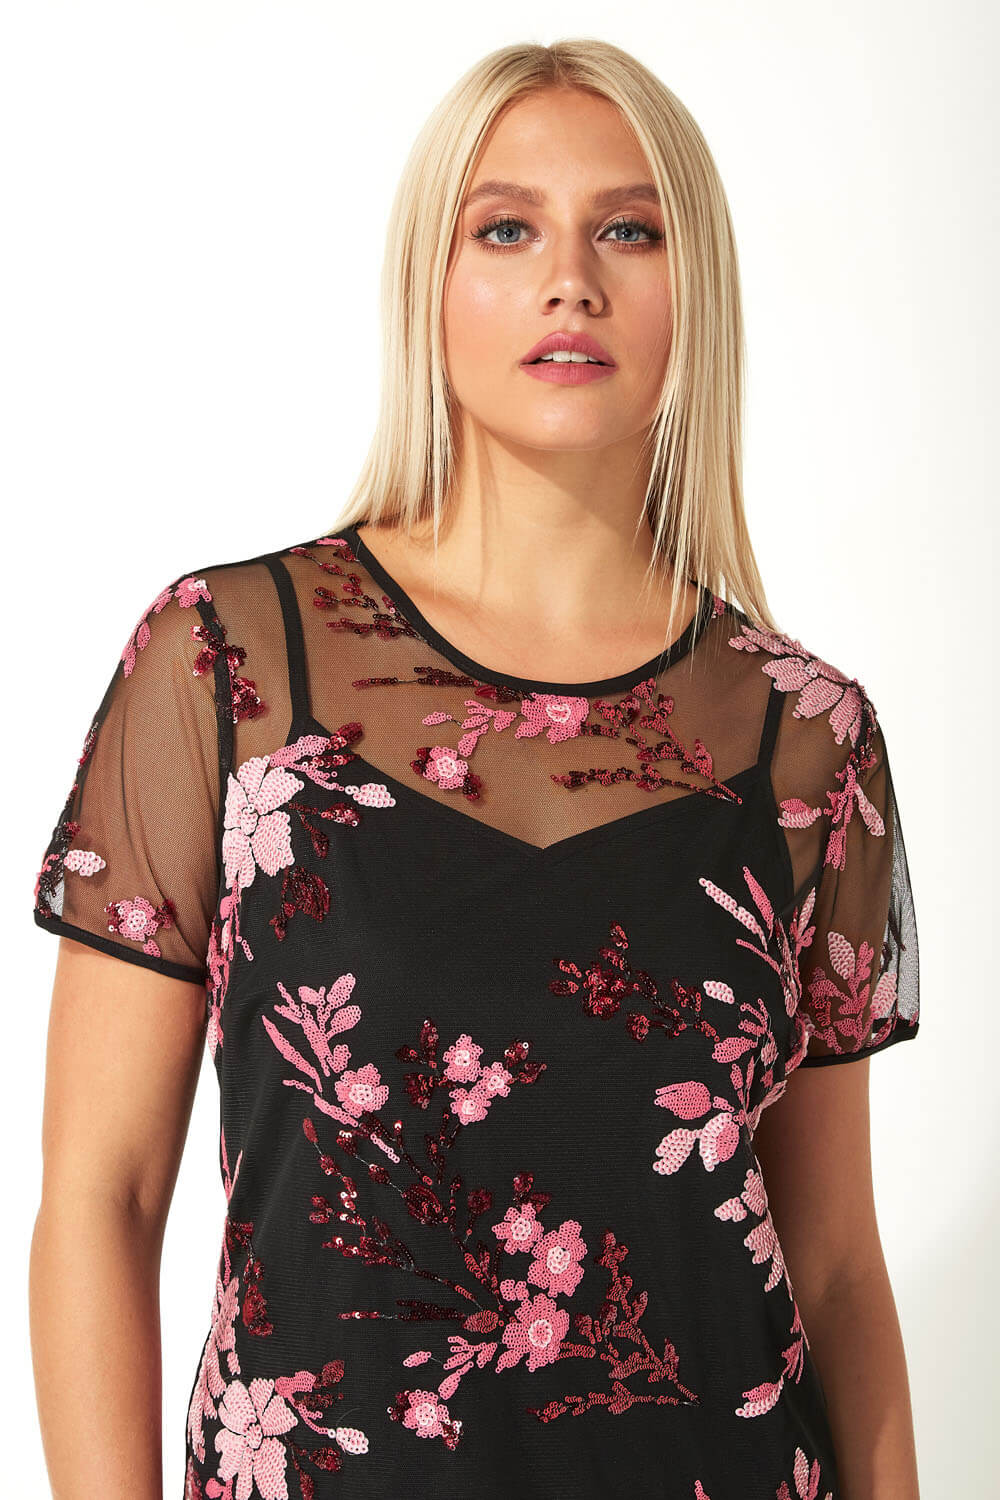 PINK Floral Mesh Embroidered Top, Image 5 of 6